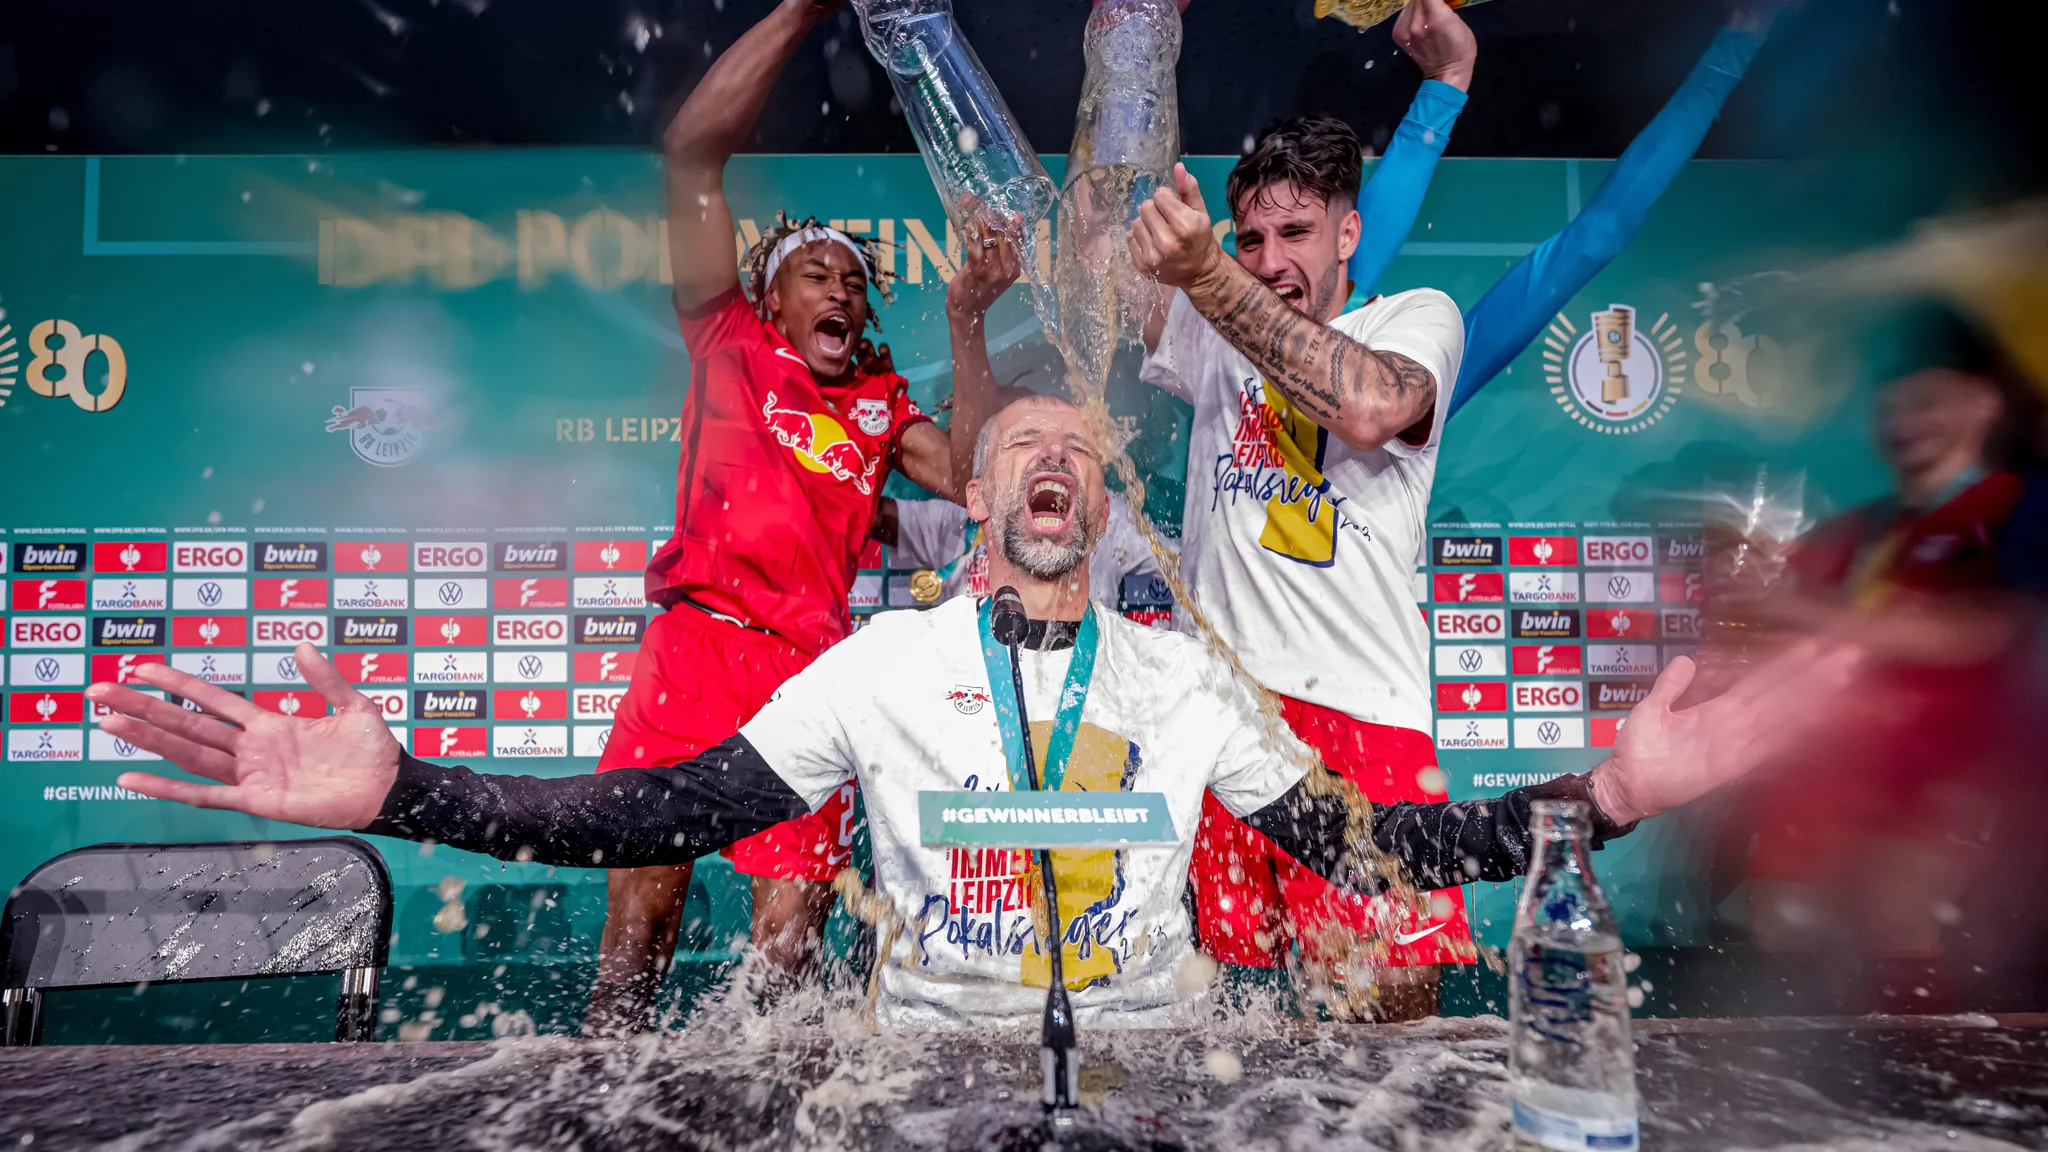 Marco Rose is drenched in beer after the DFB Cup win.